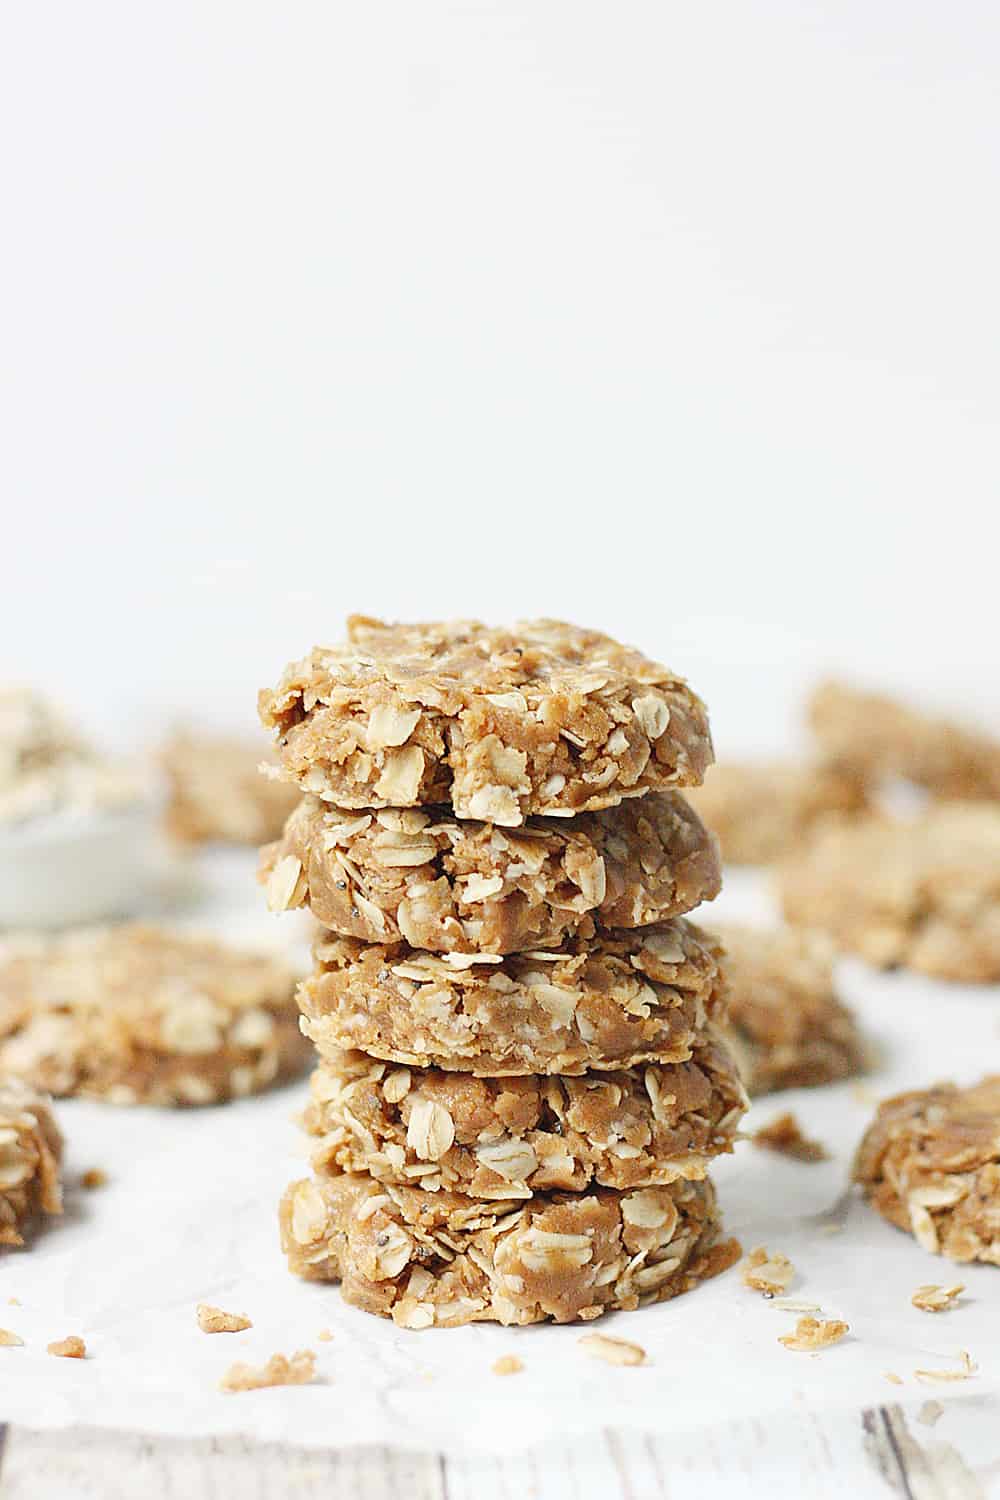 Healthy No-Bake Peanut Butter Oatmeal Protein Cookies --These healthy no bake cookies aren't packed with ingredients (only peanut butter, maple syrup, oatmeal, and vanilla protein) but they are packed with yummy flavor! They are as irresistible as they are easy! #halfscratched #nobake #cookies #healthyrecipe #oatmealcookies #peanutbutter #proteincookies #proteinbites #healthy #snack